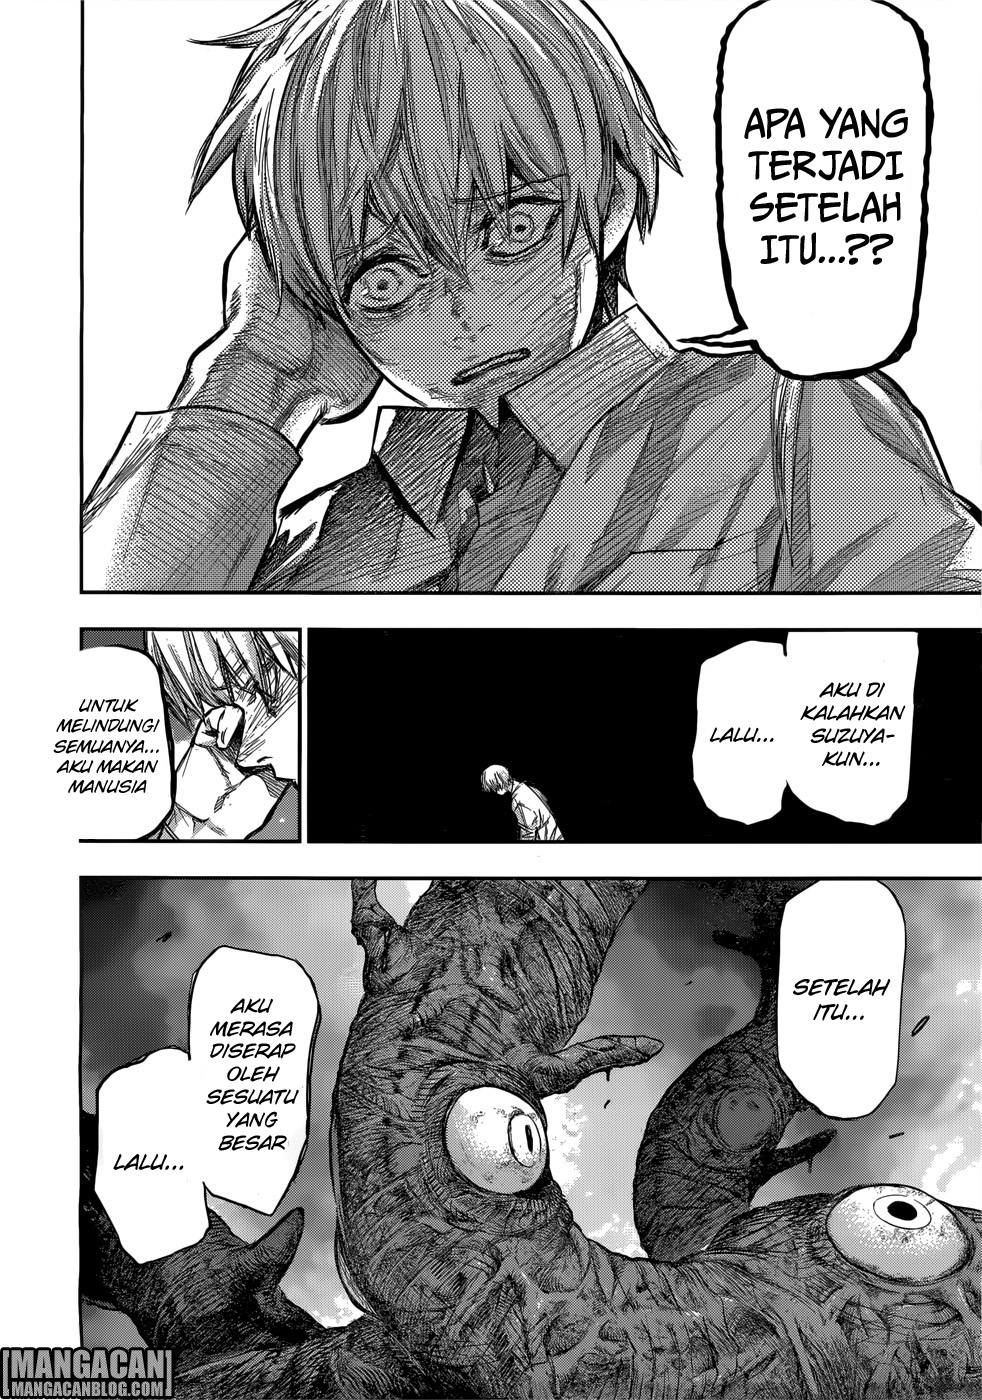 Tokyo Ghoul:re Chapter 157